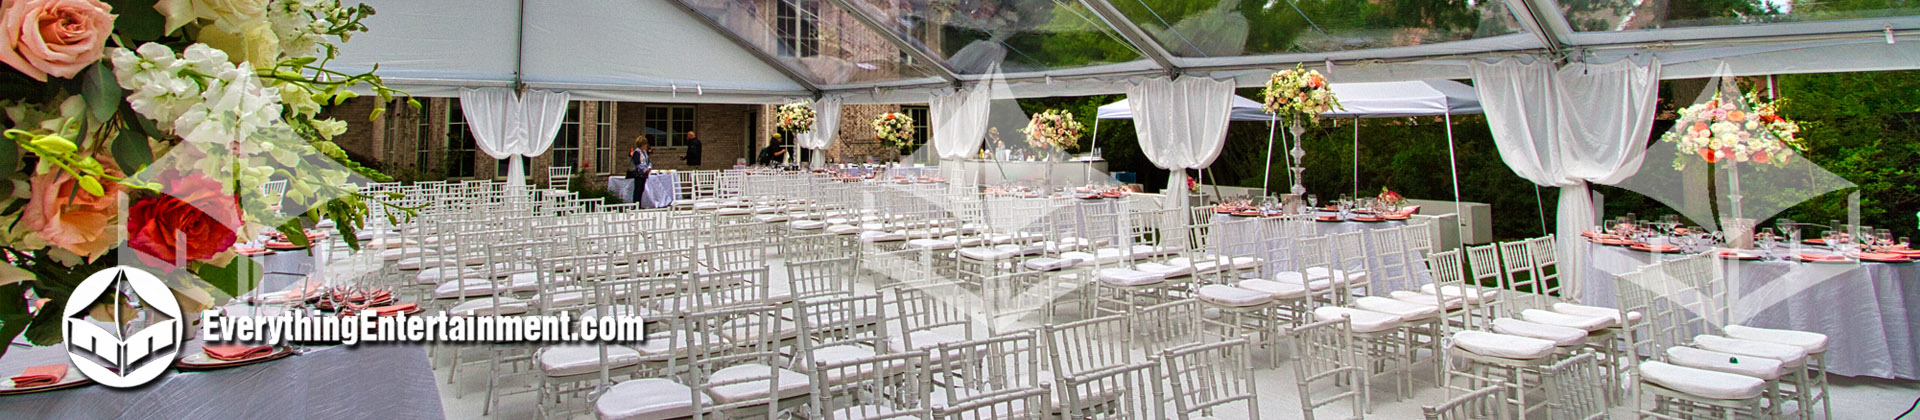 interior of a clear top tent with balloom chairs setup for a wedding ceremony